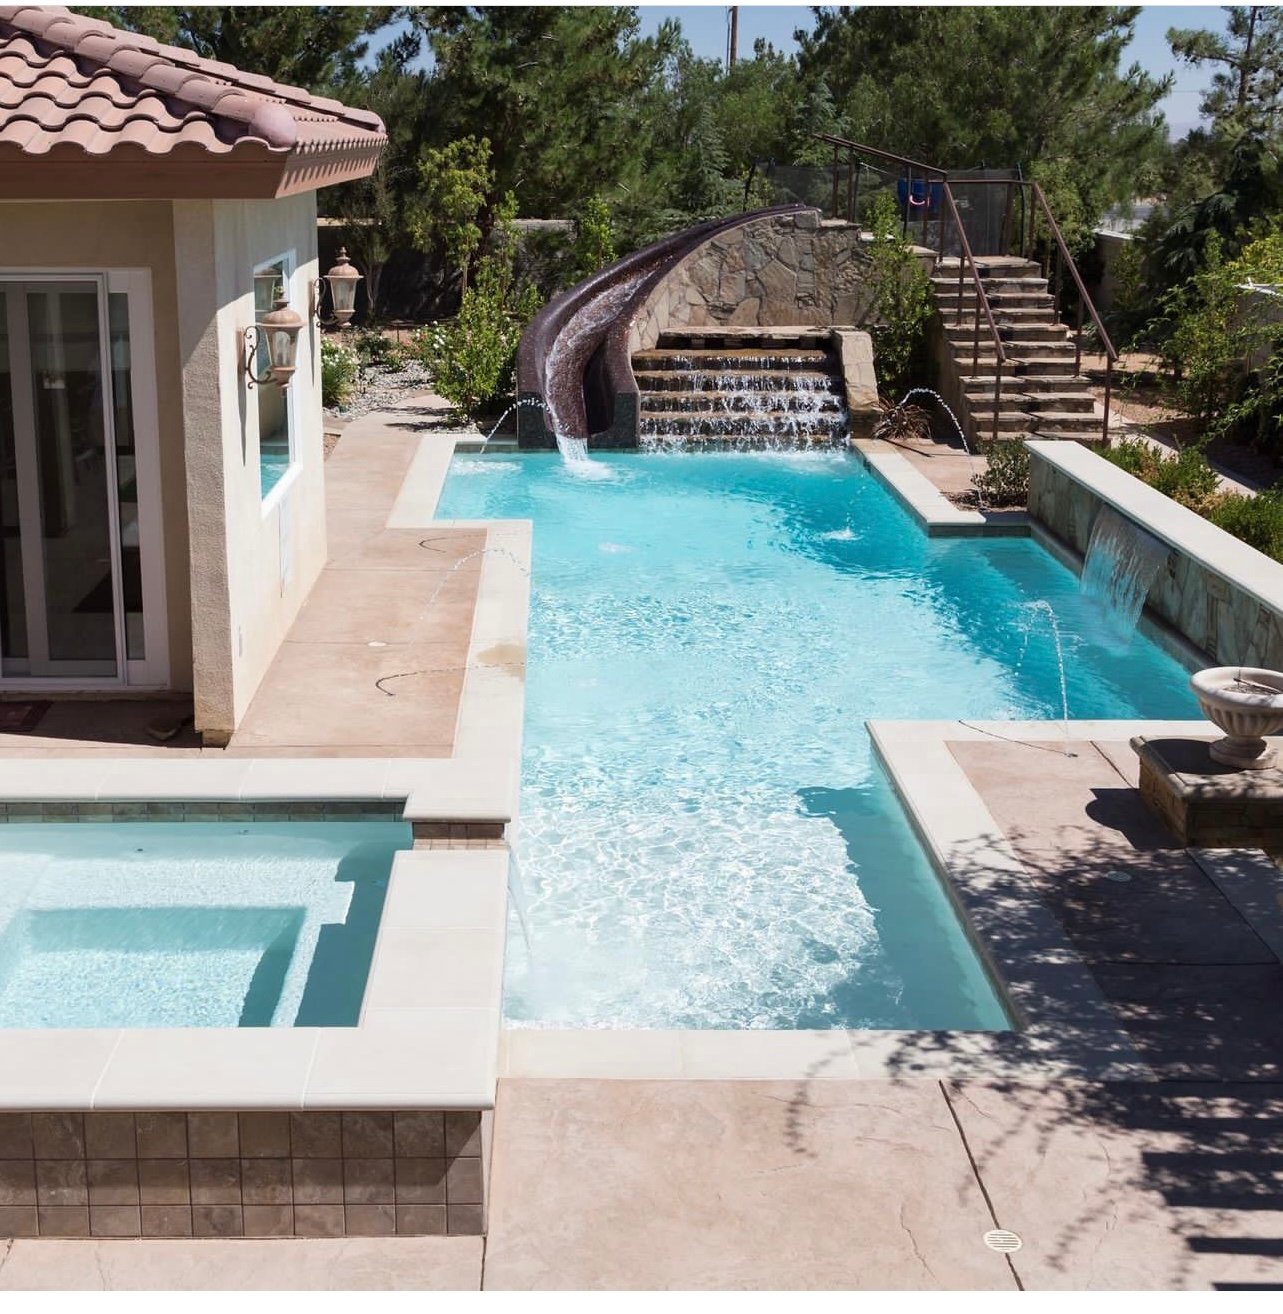 Pool Cleaning Service In Orange County